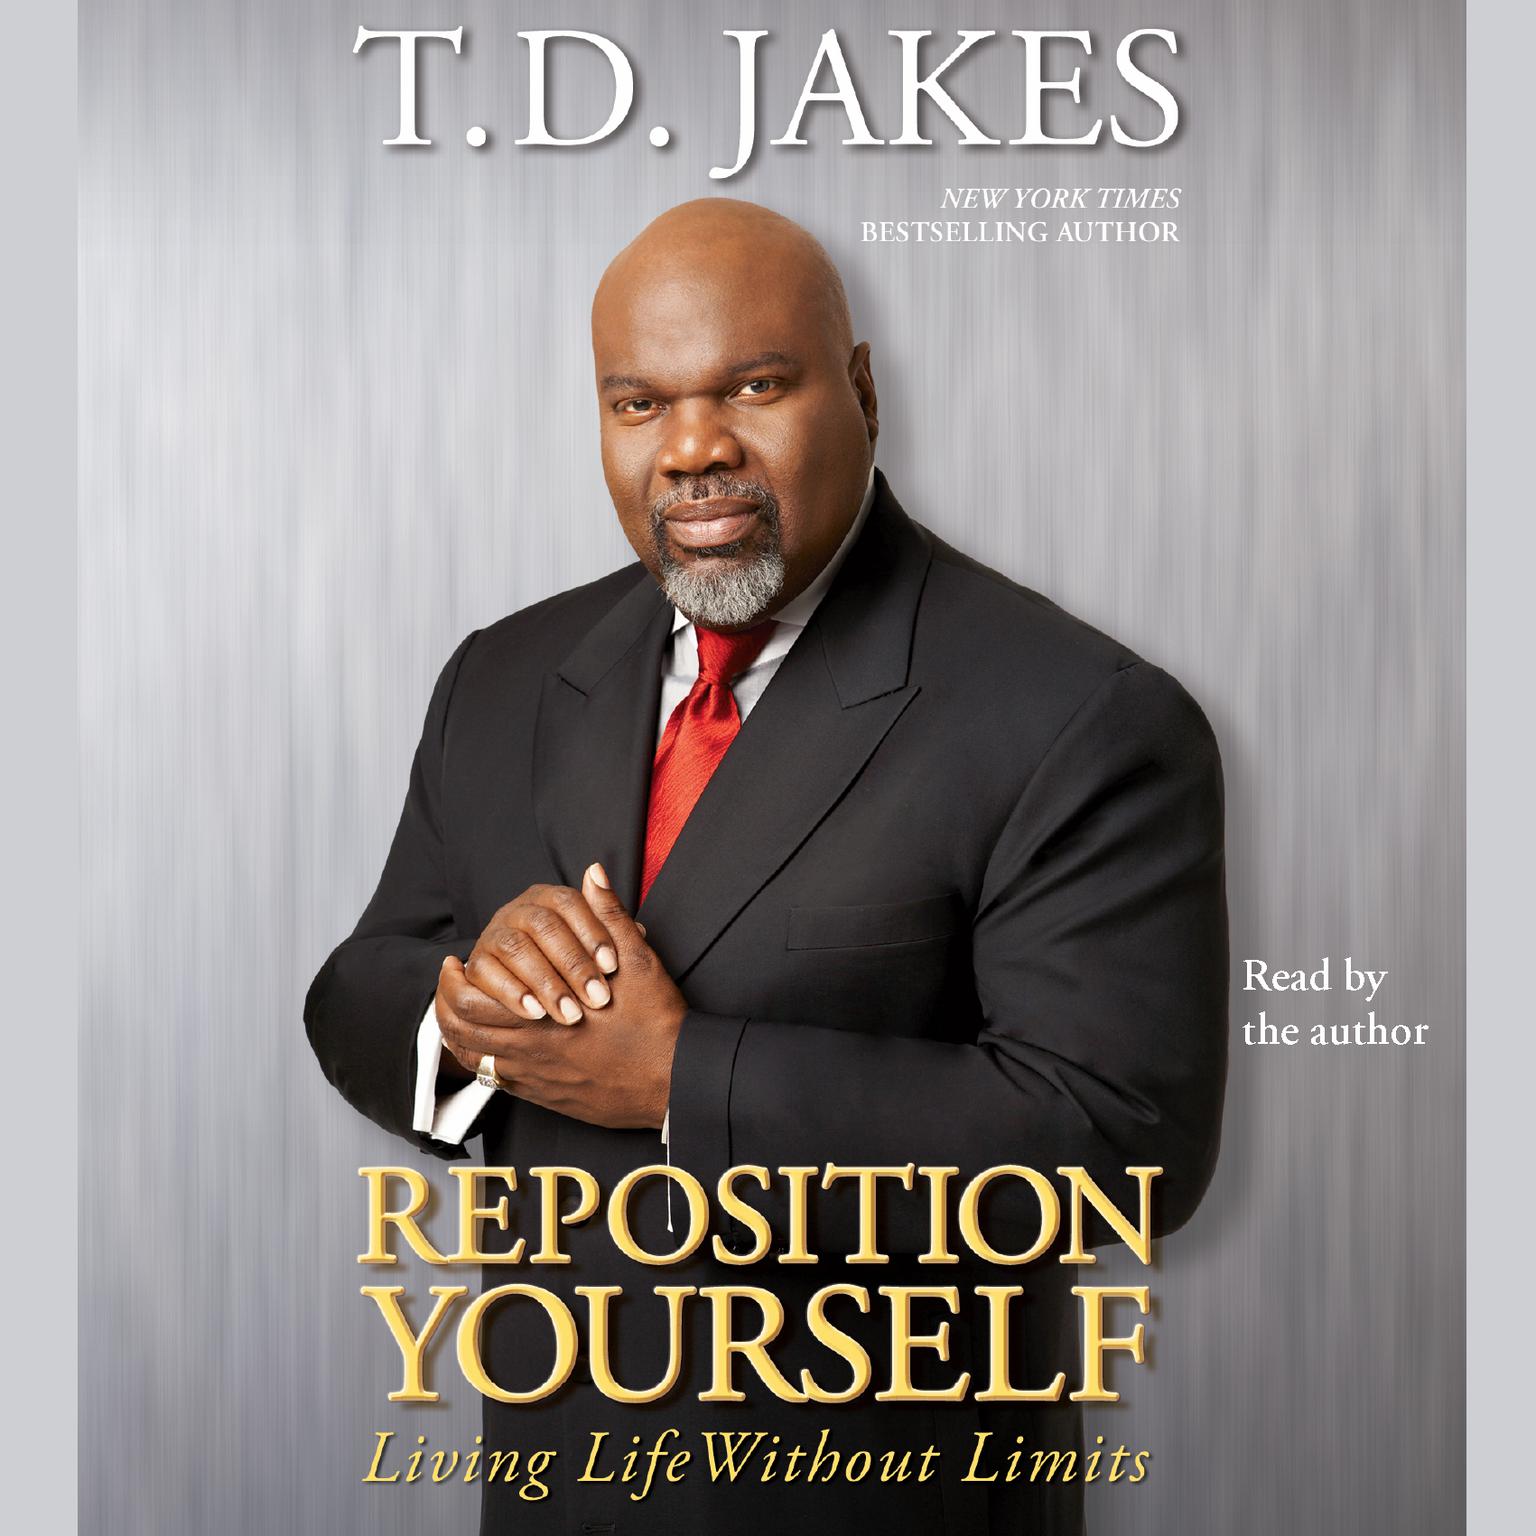 Reposition Yourself (Abridged): Living Life Without Limits Audiobook, by T. D. Jakes